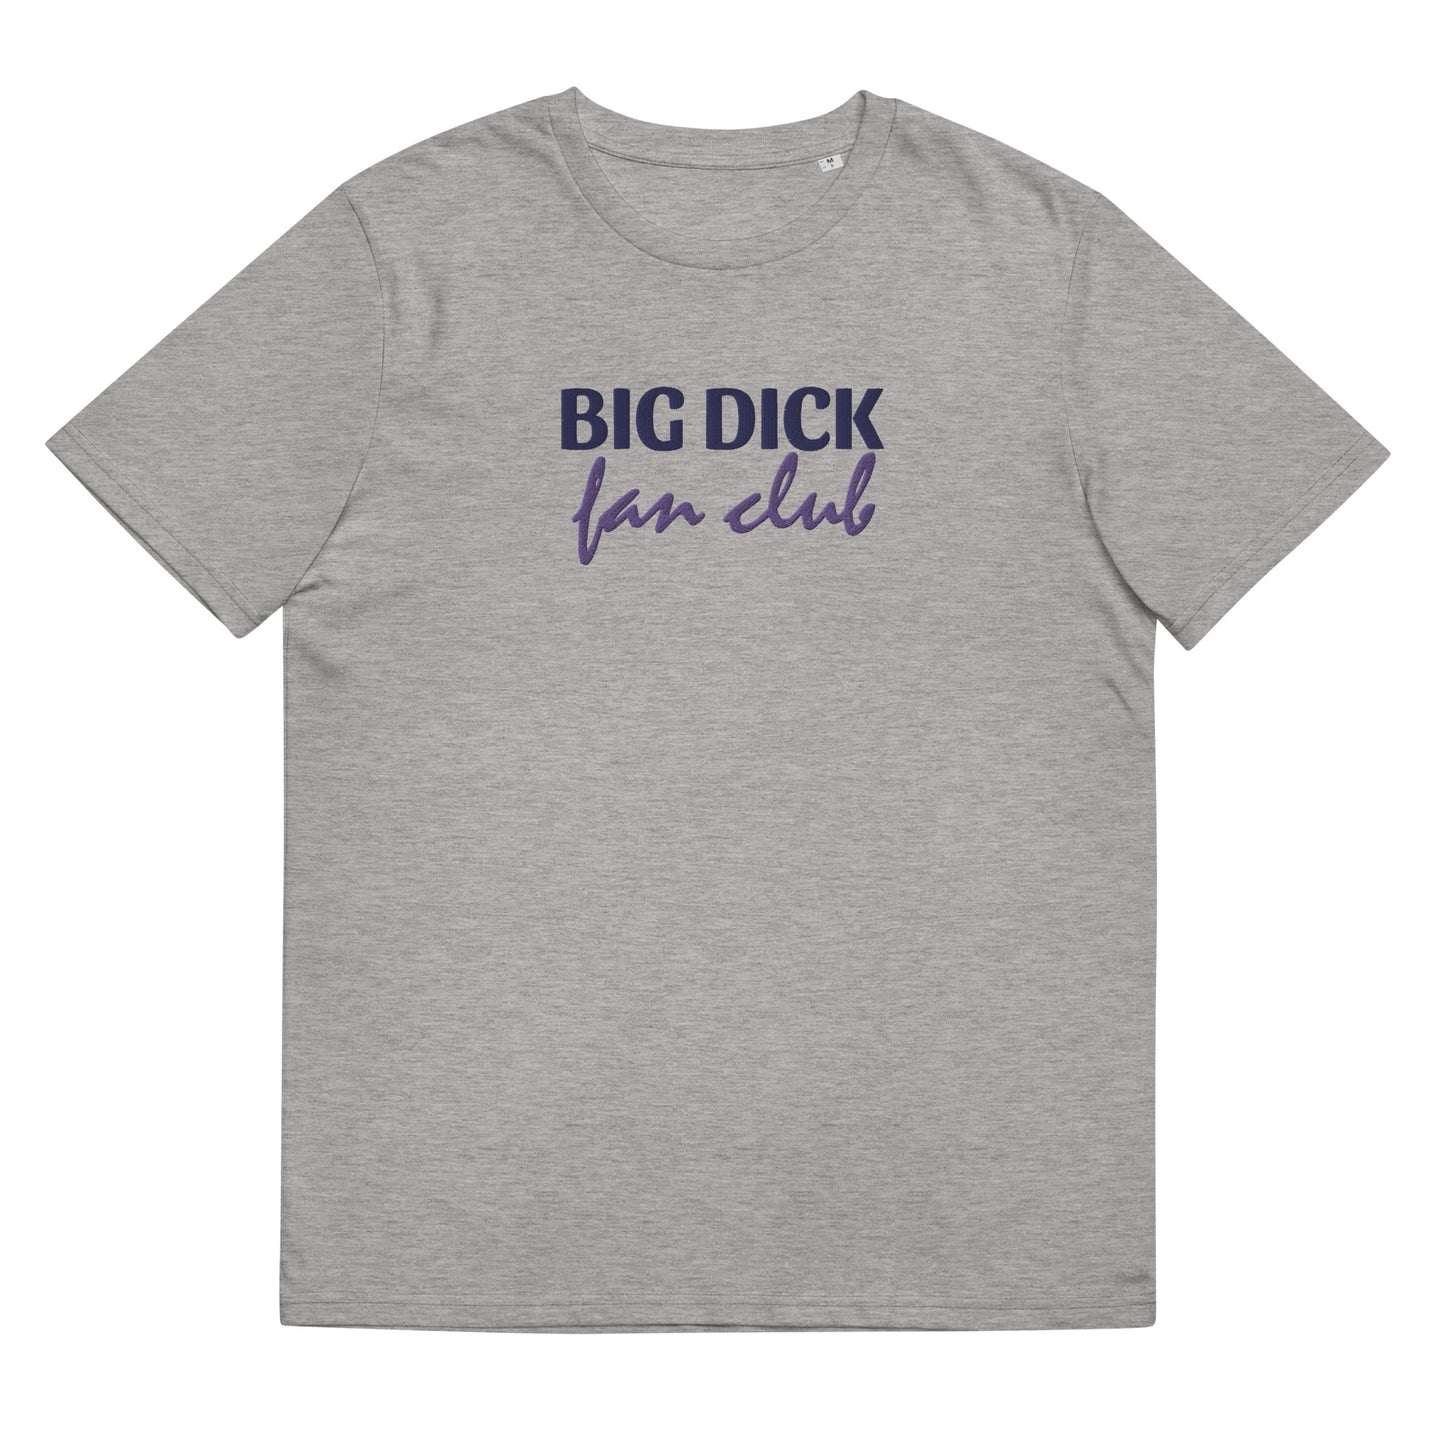 Fitted heather grey organic cotton t-shirt with an embroidered gay joke: "big d fan club" on the center chest. Available in sizes S to 3XL.